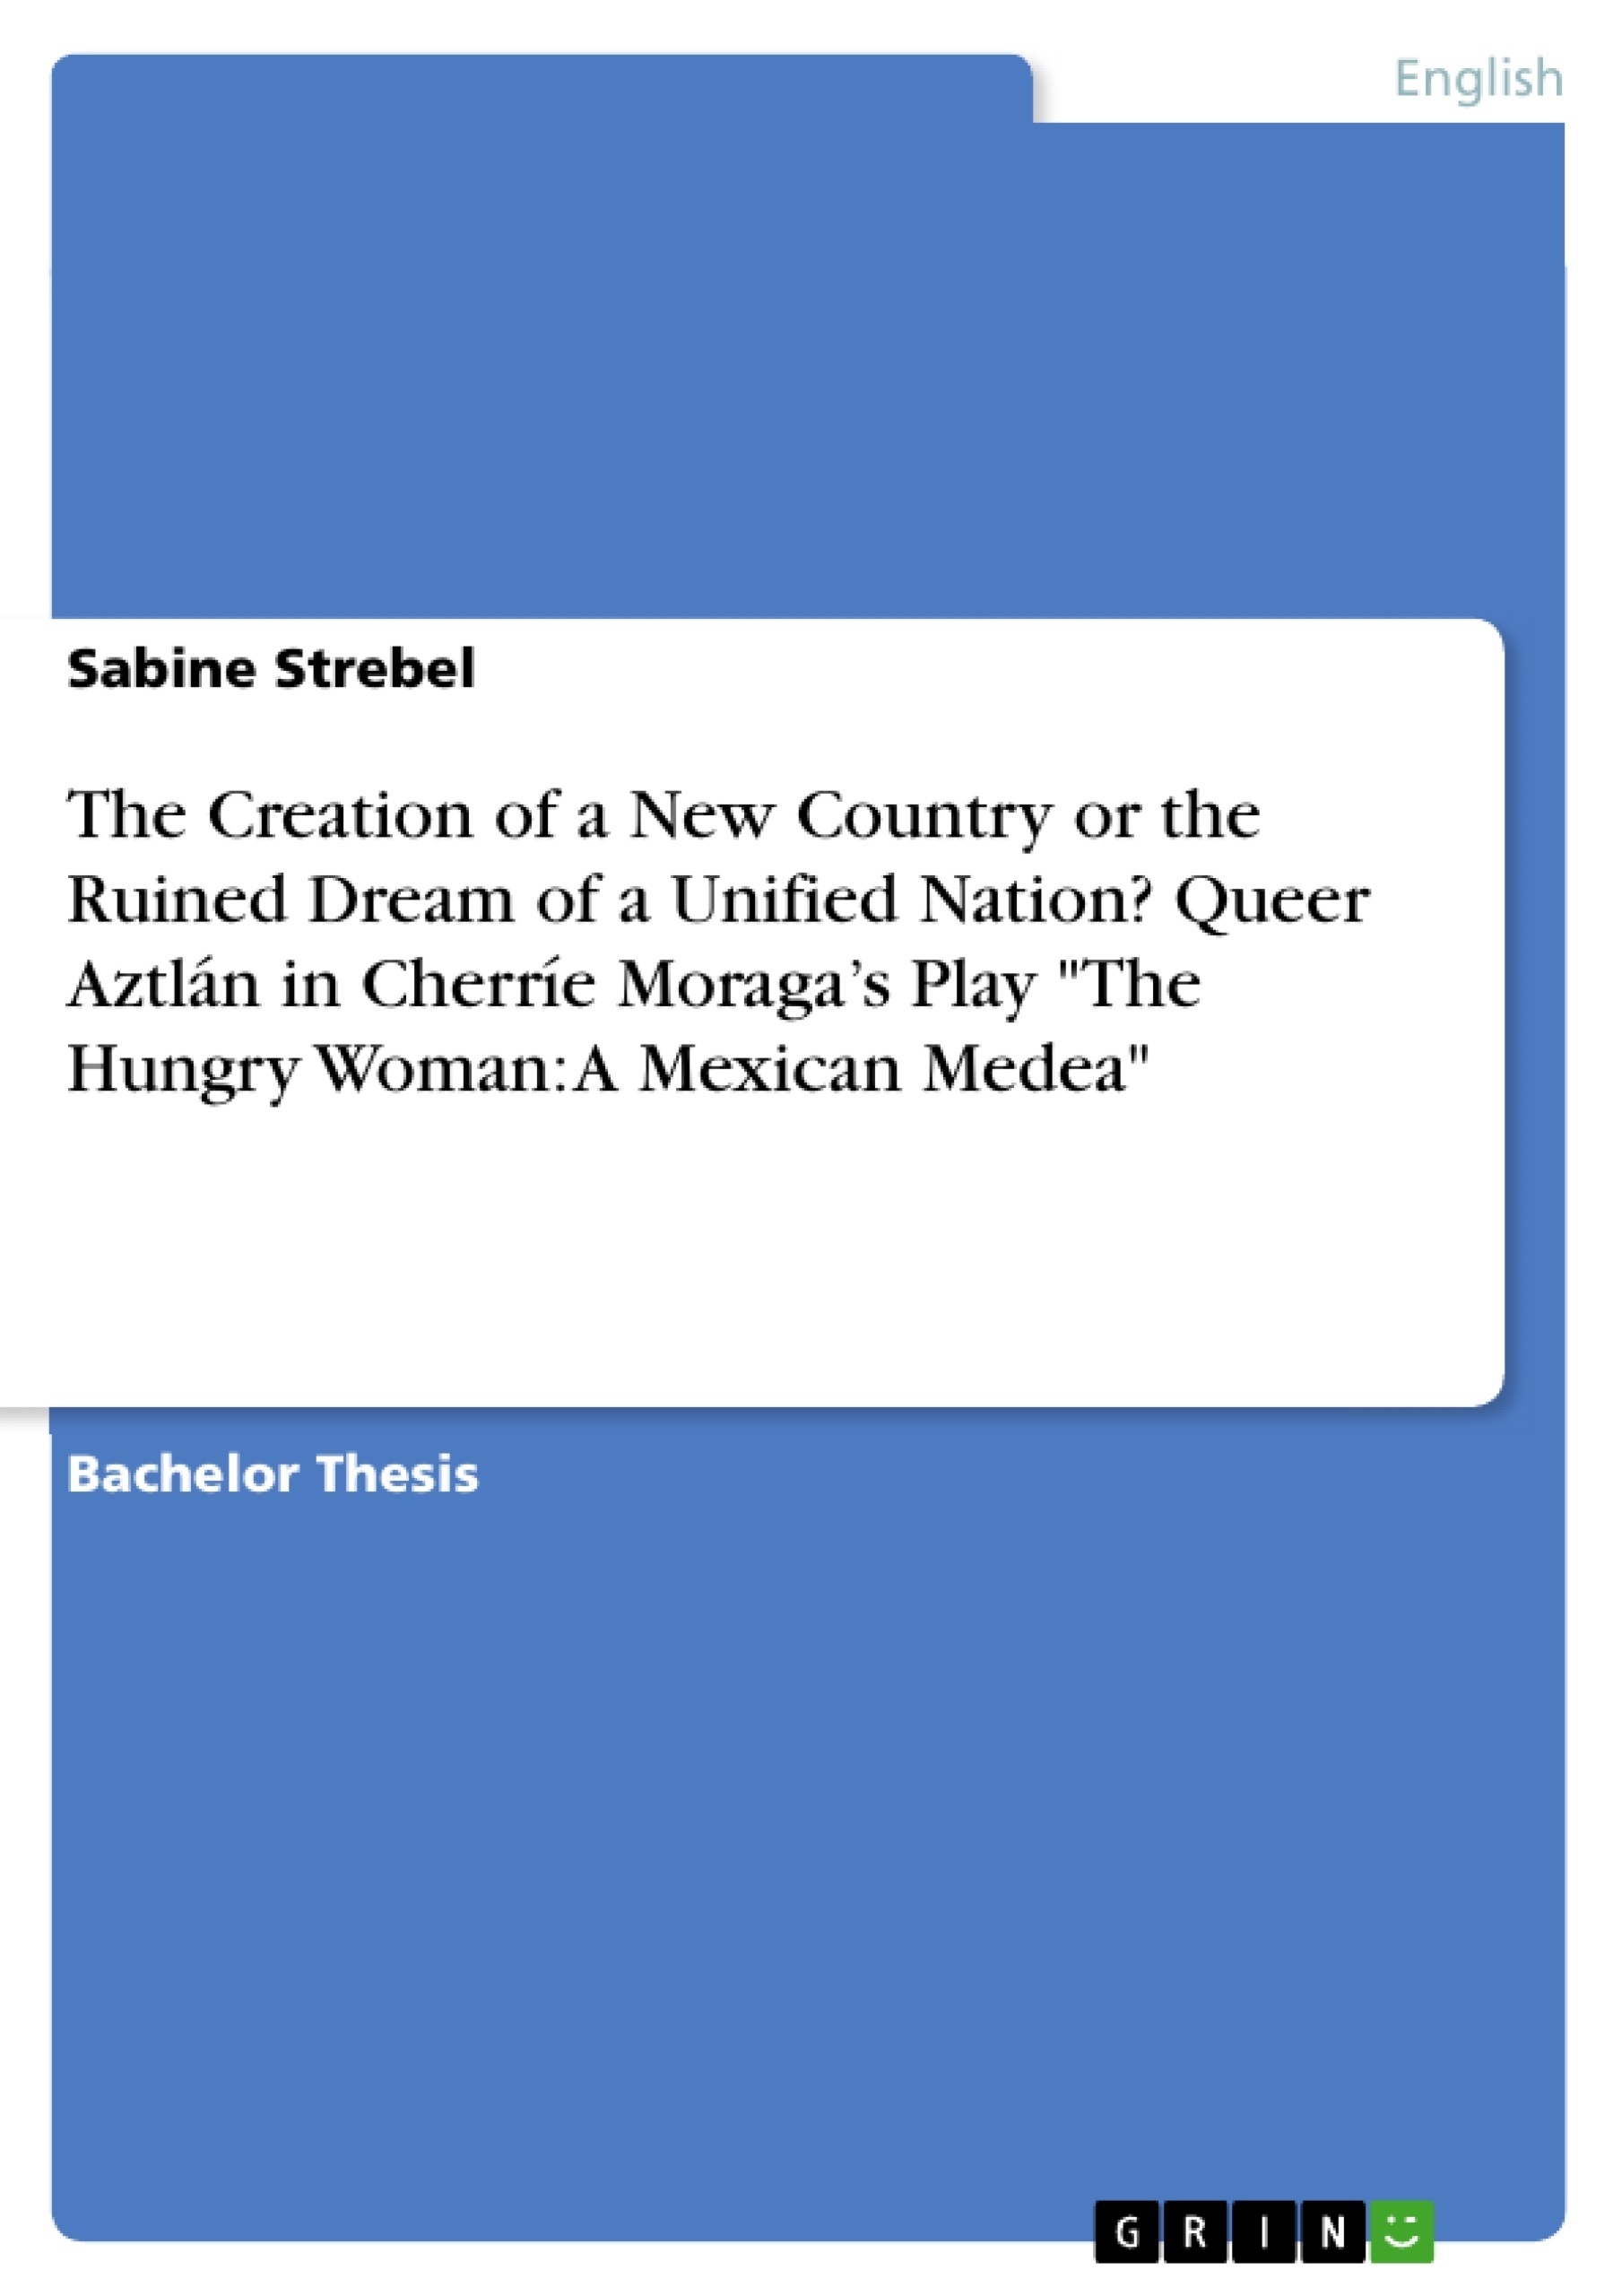 Title: The Creation of a New Country or the Ruined Dream of a Unified Nation? Queer Aztlán in Cherríe Moraga’s Play "The Hungry Woman: A Mexican Medea"